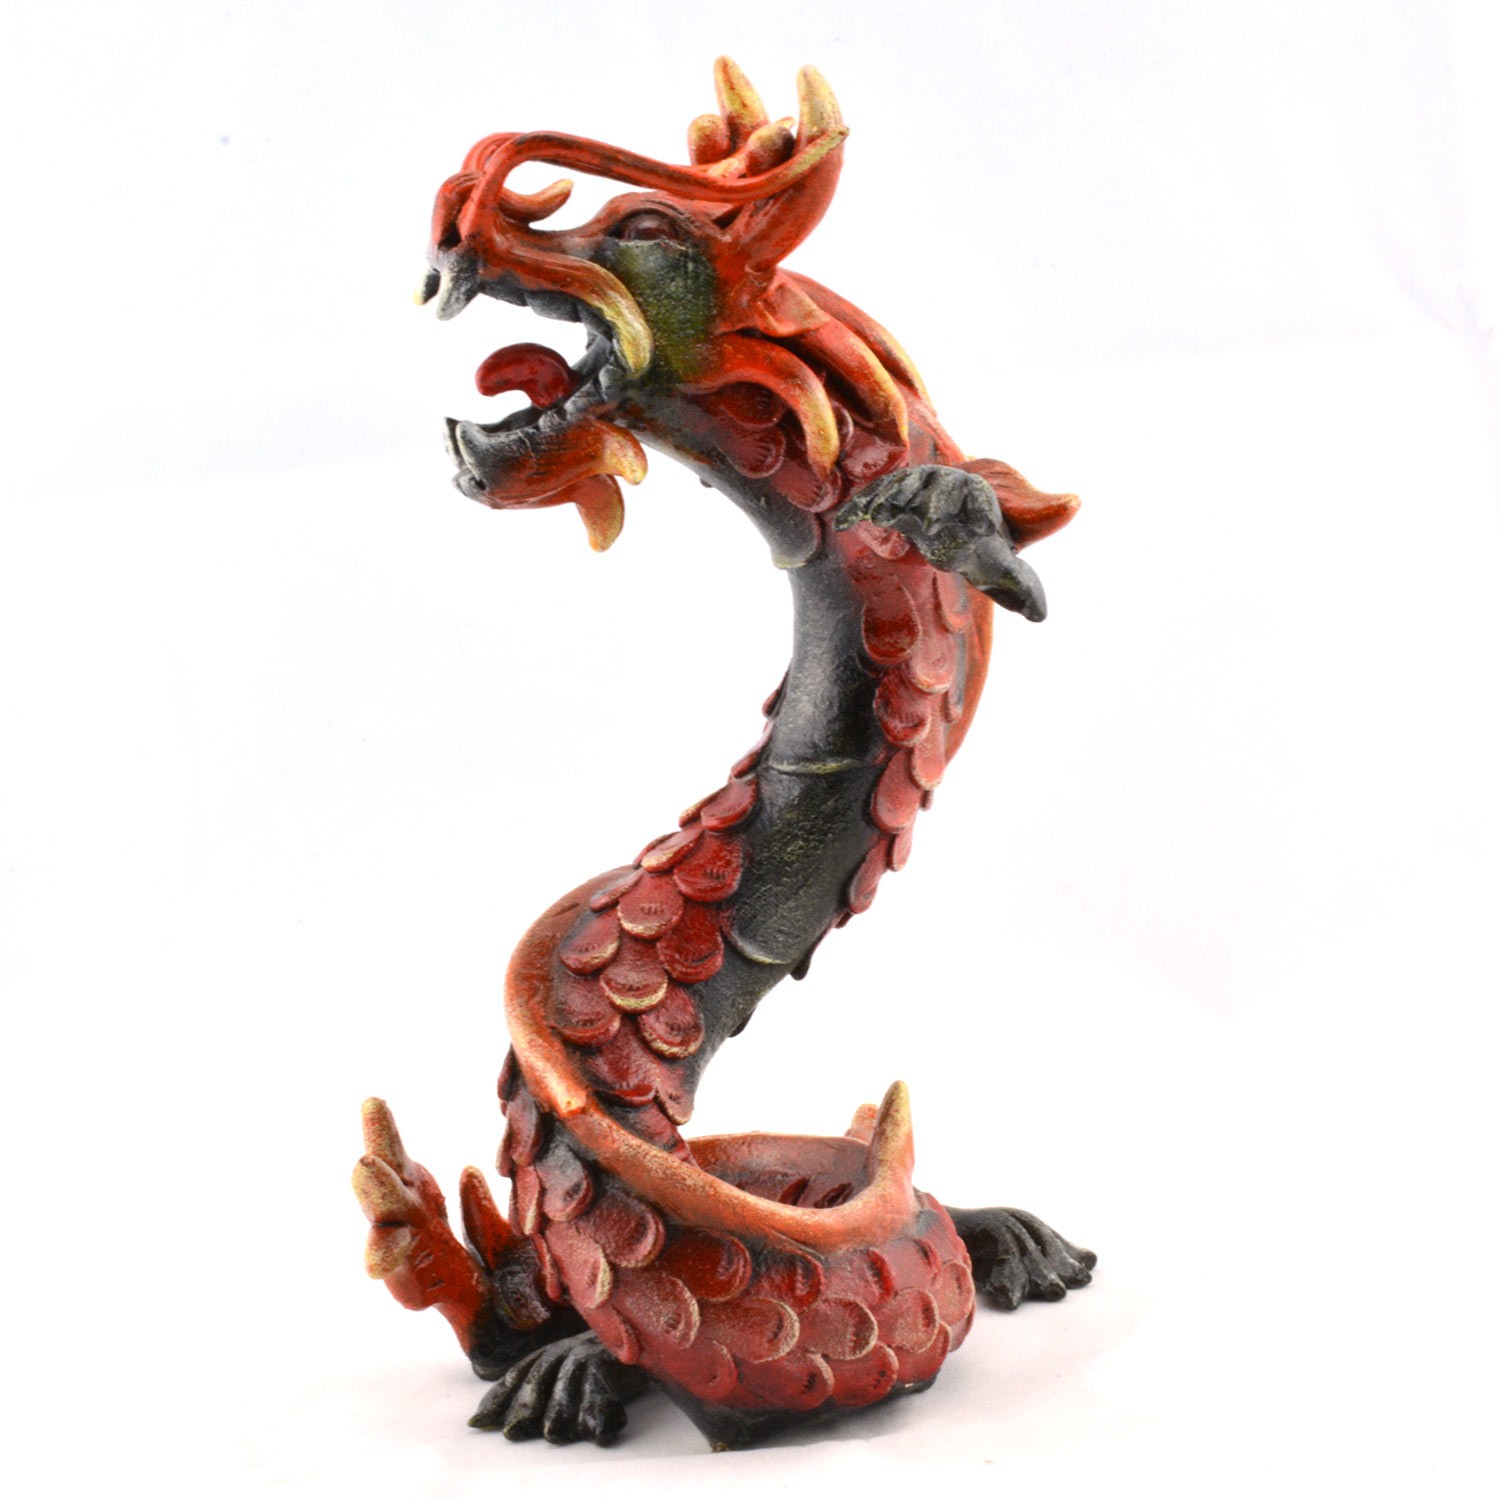 Dragon auspicious Coiled Stance Sculpture - Wooden Carved